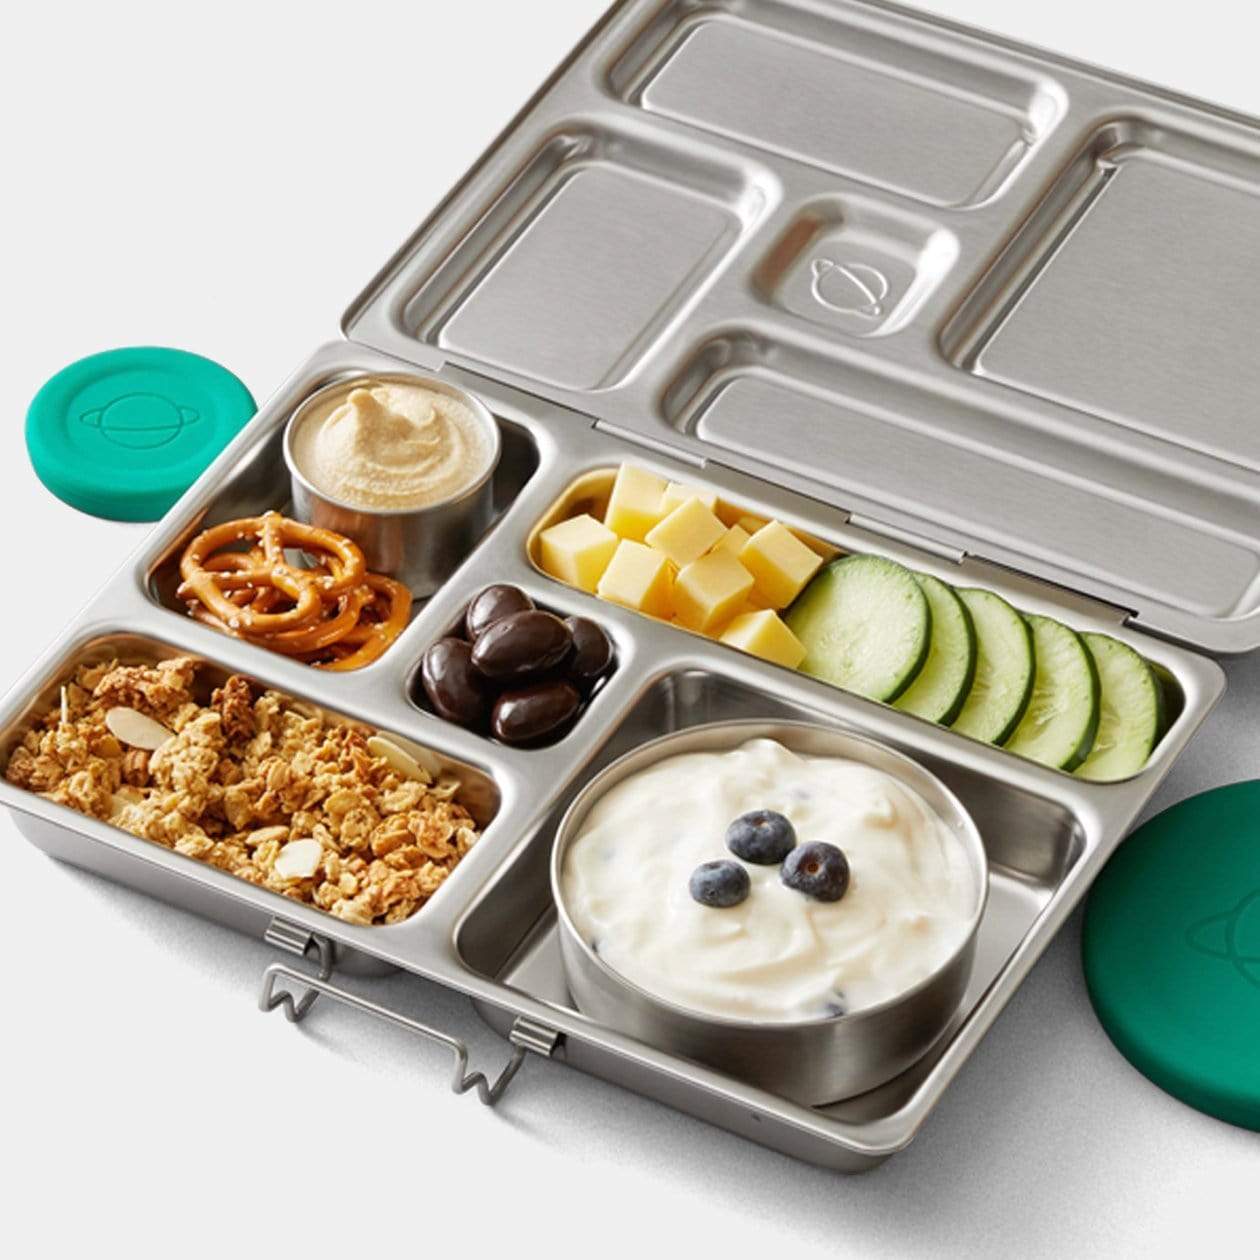 The Food Librarian: Why I Love My Planetbox Launch & Rover Lunchboxes